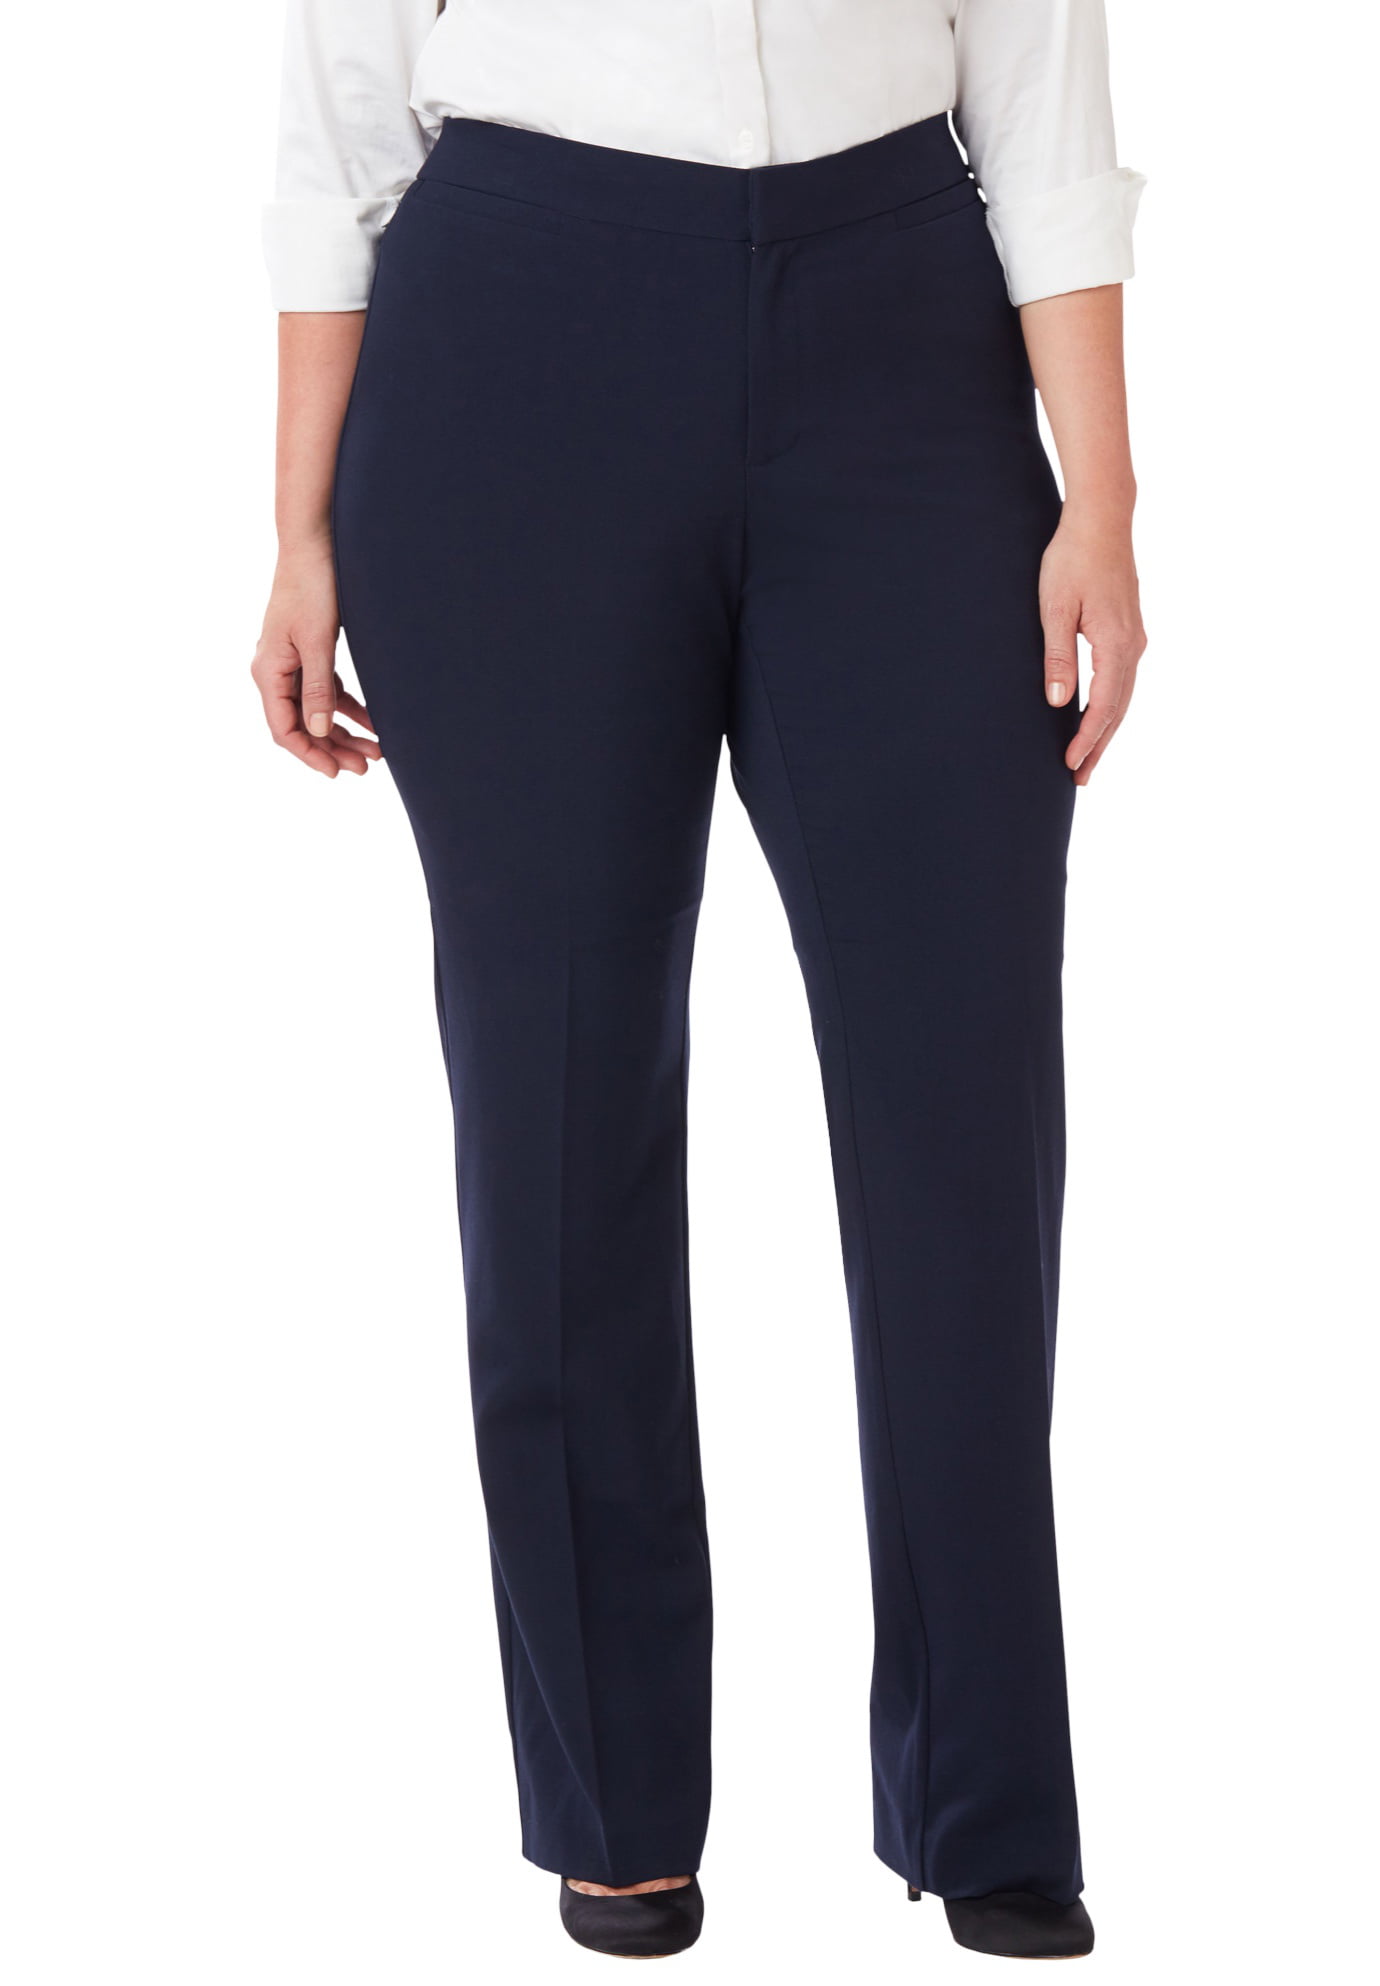 Catherines - Catherines Women's Plus Size Right Fit Pant (Curvy) - 24 W ...